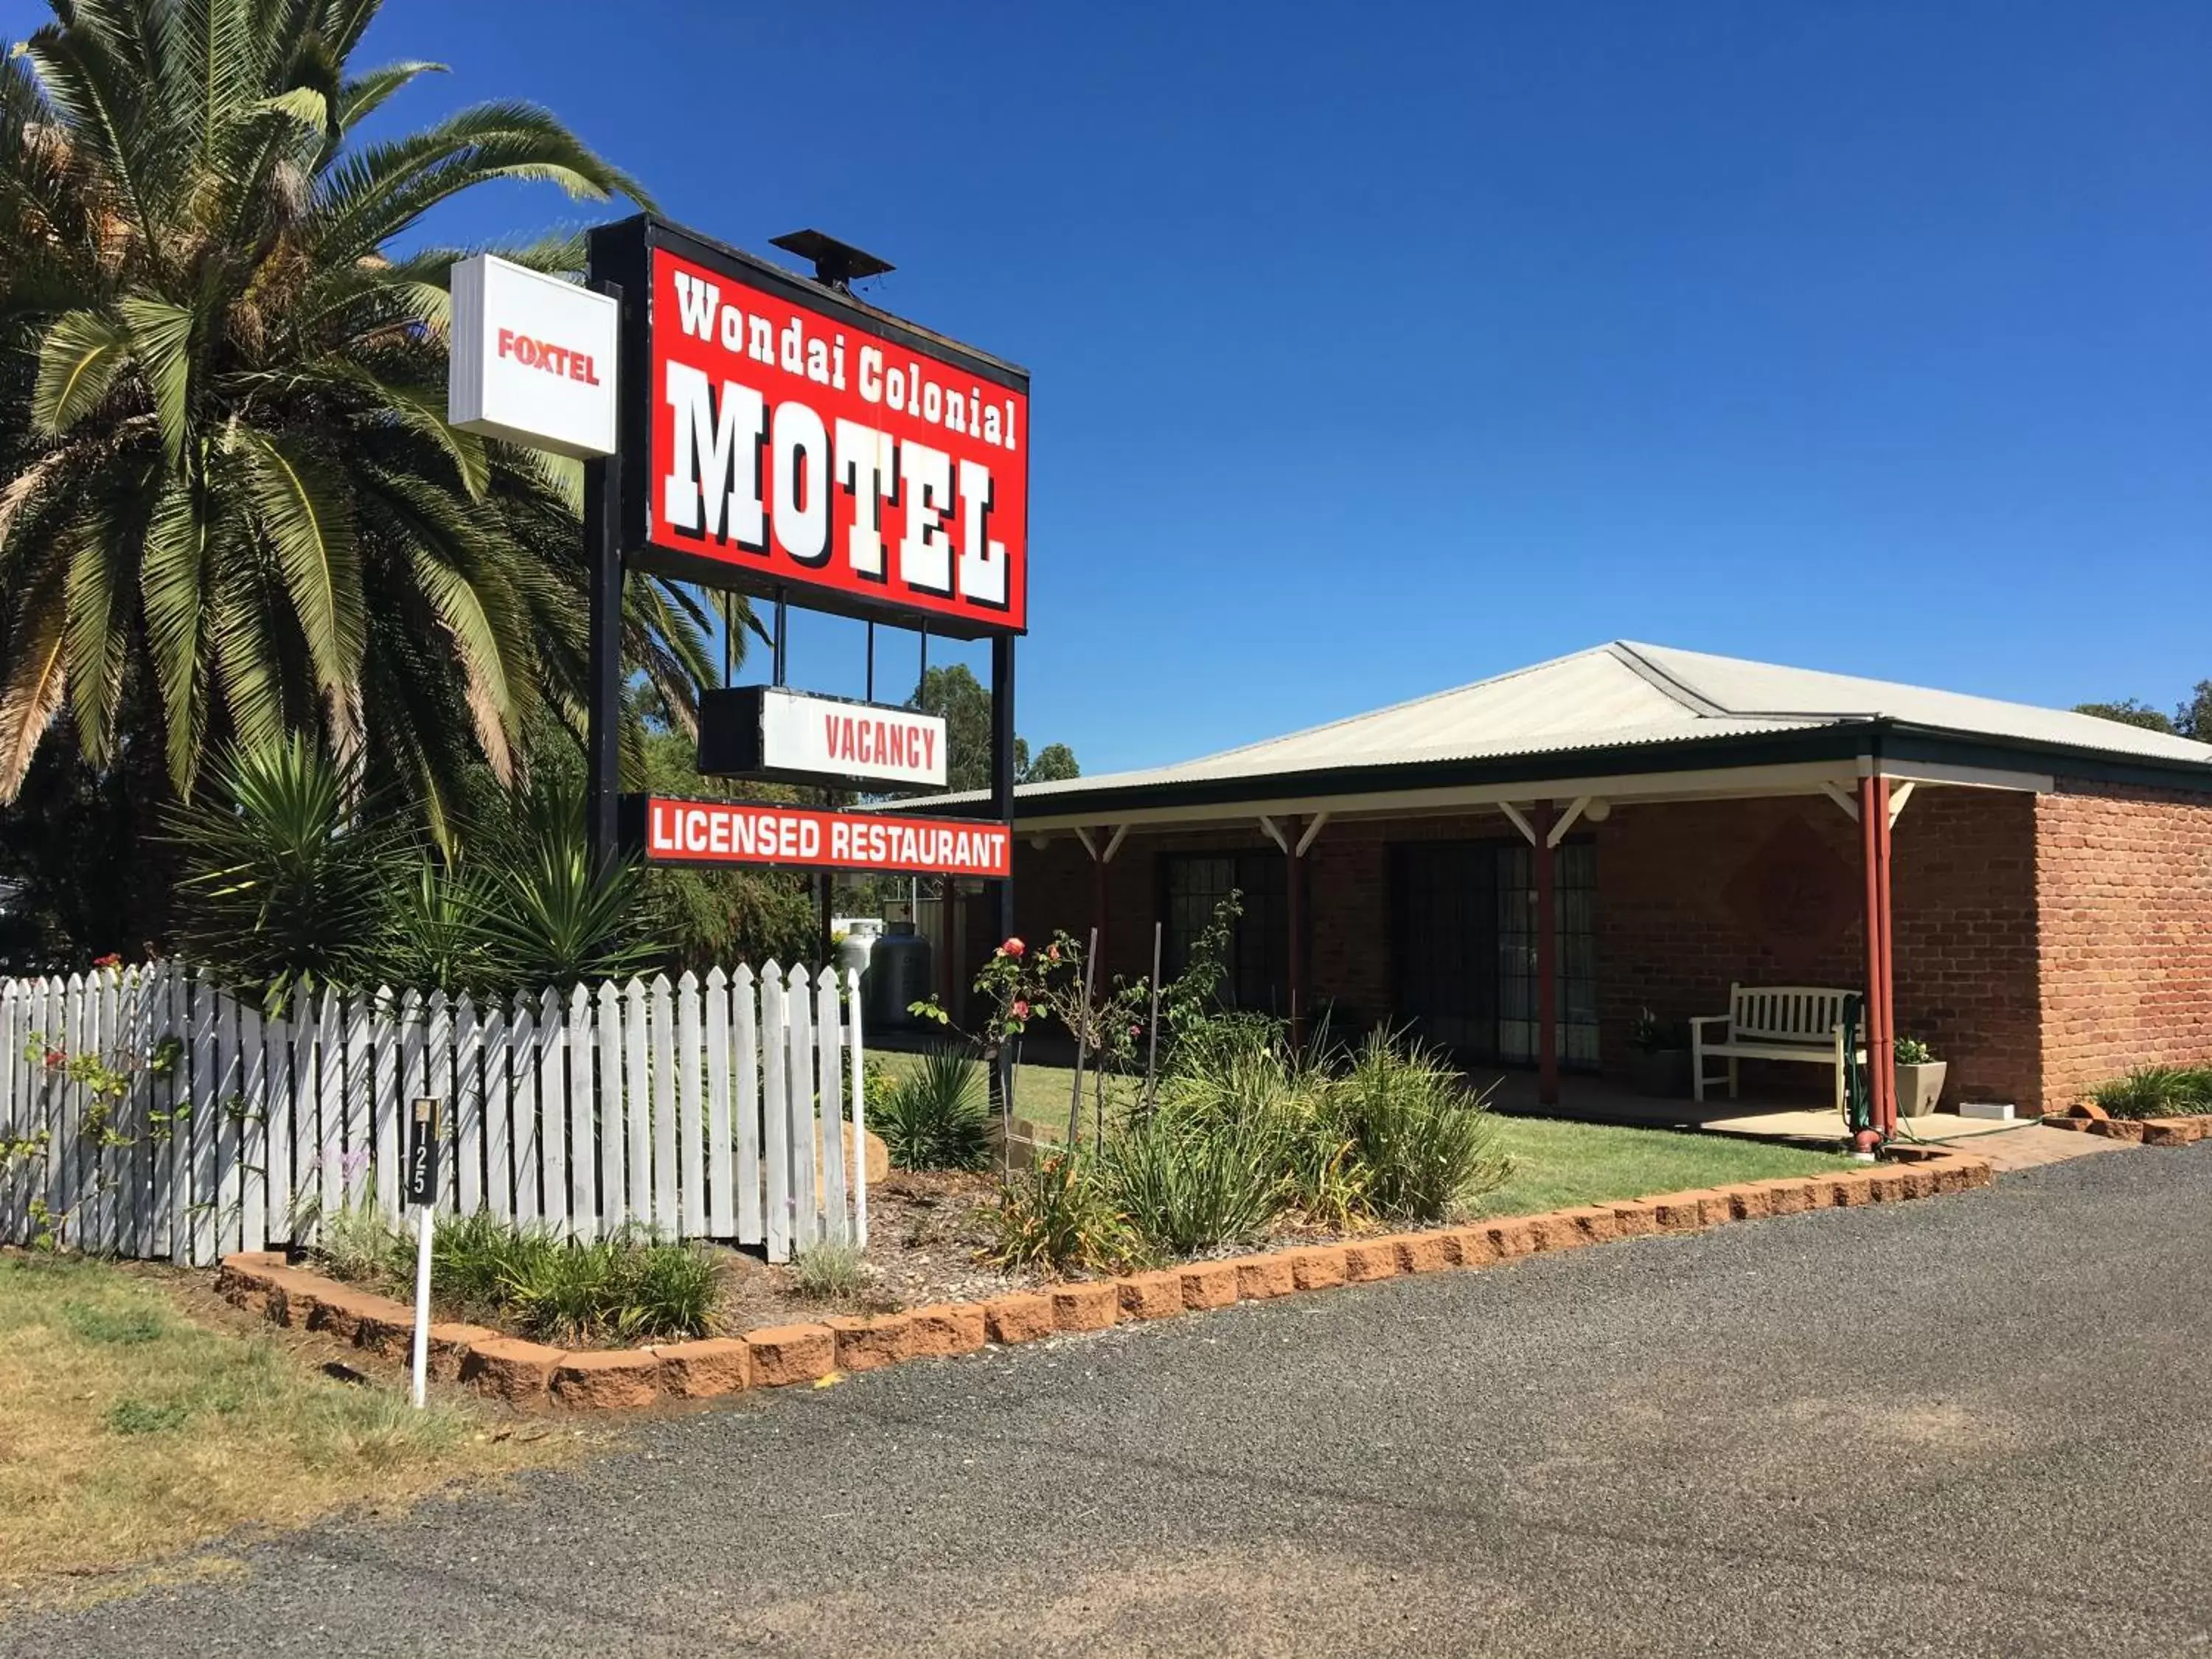 Property Building in Wondai Colonial Motel